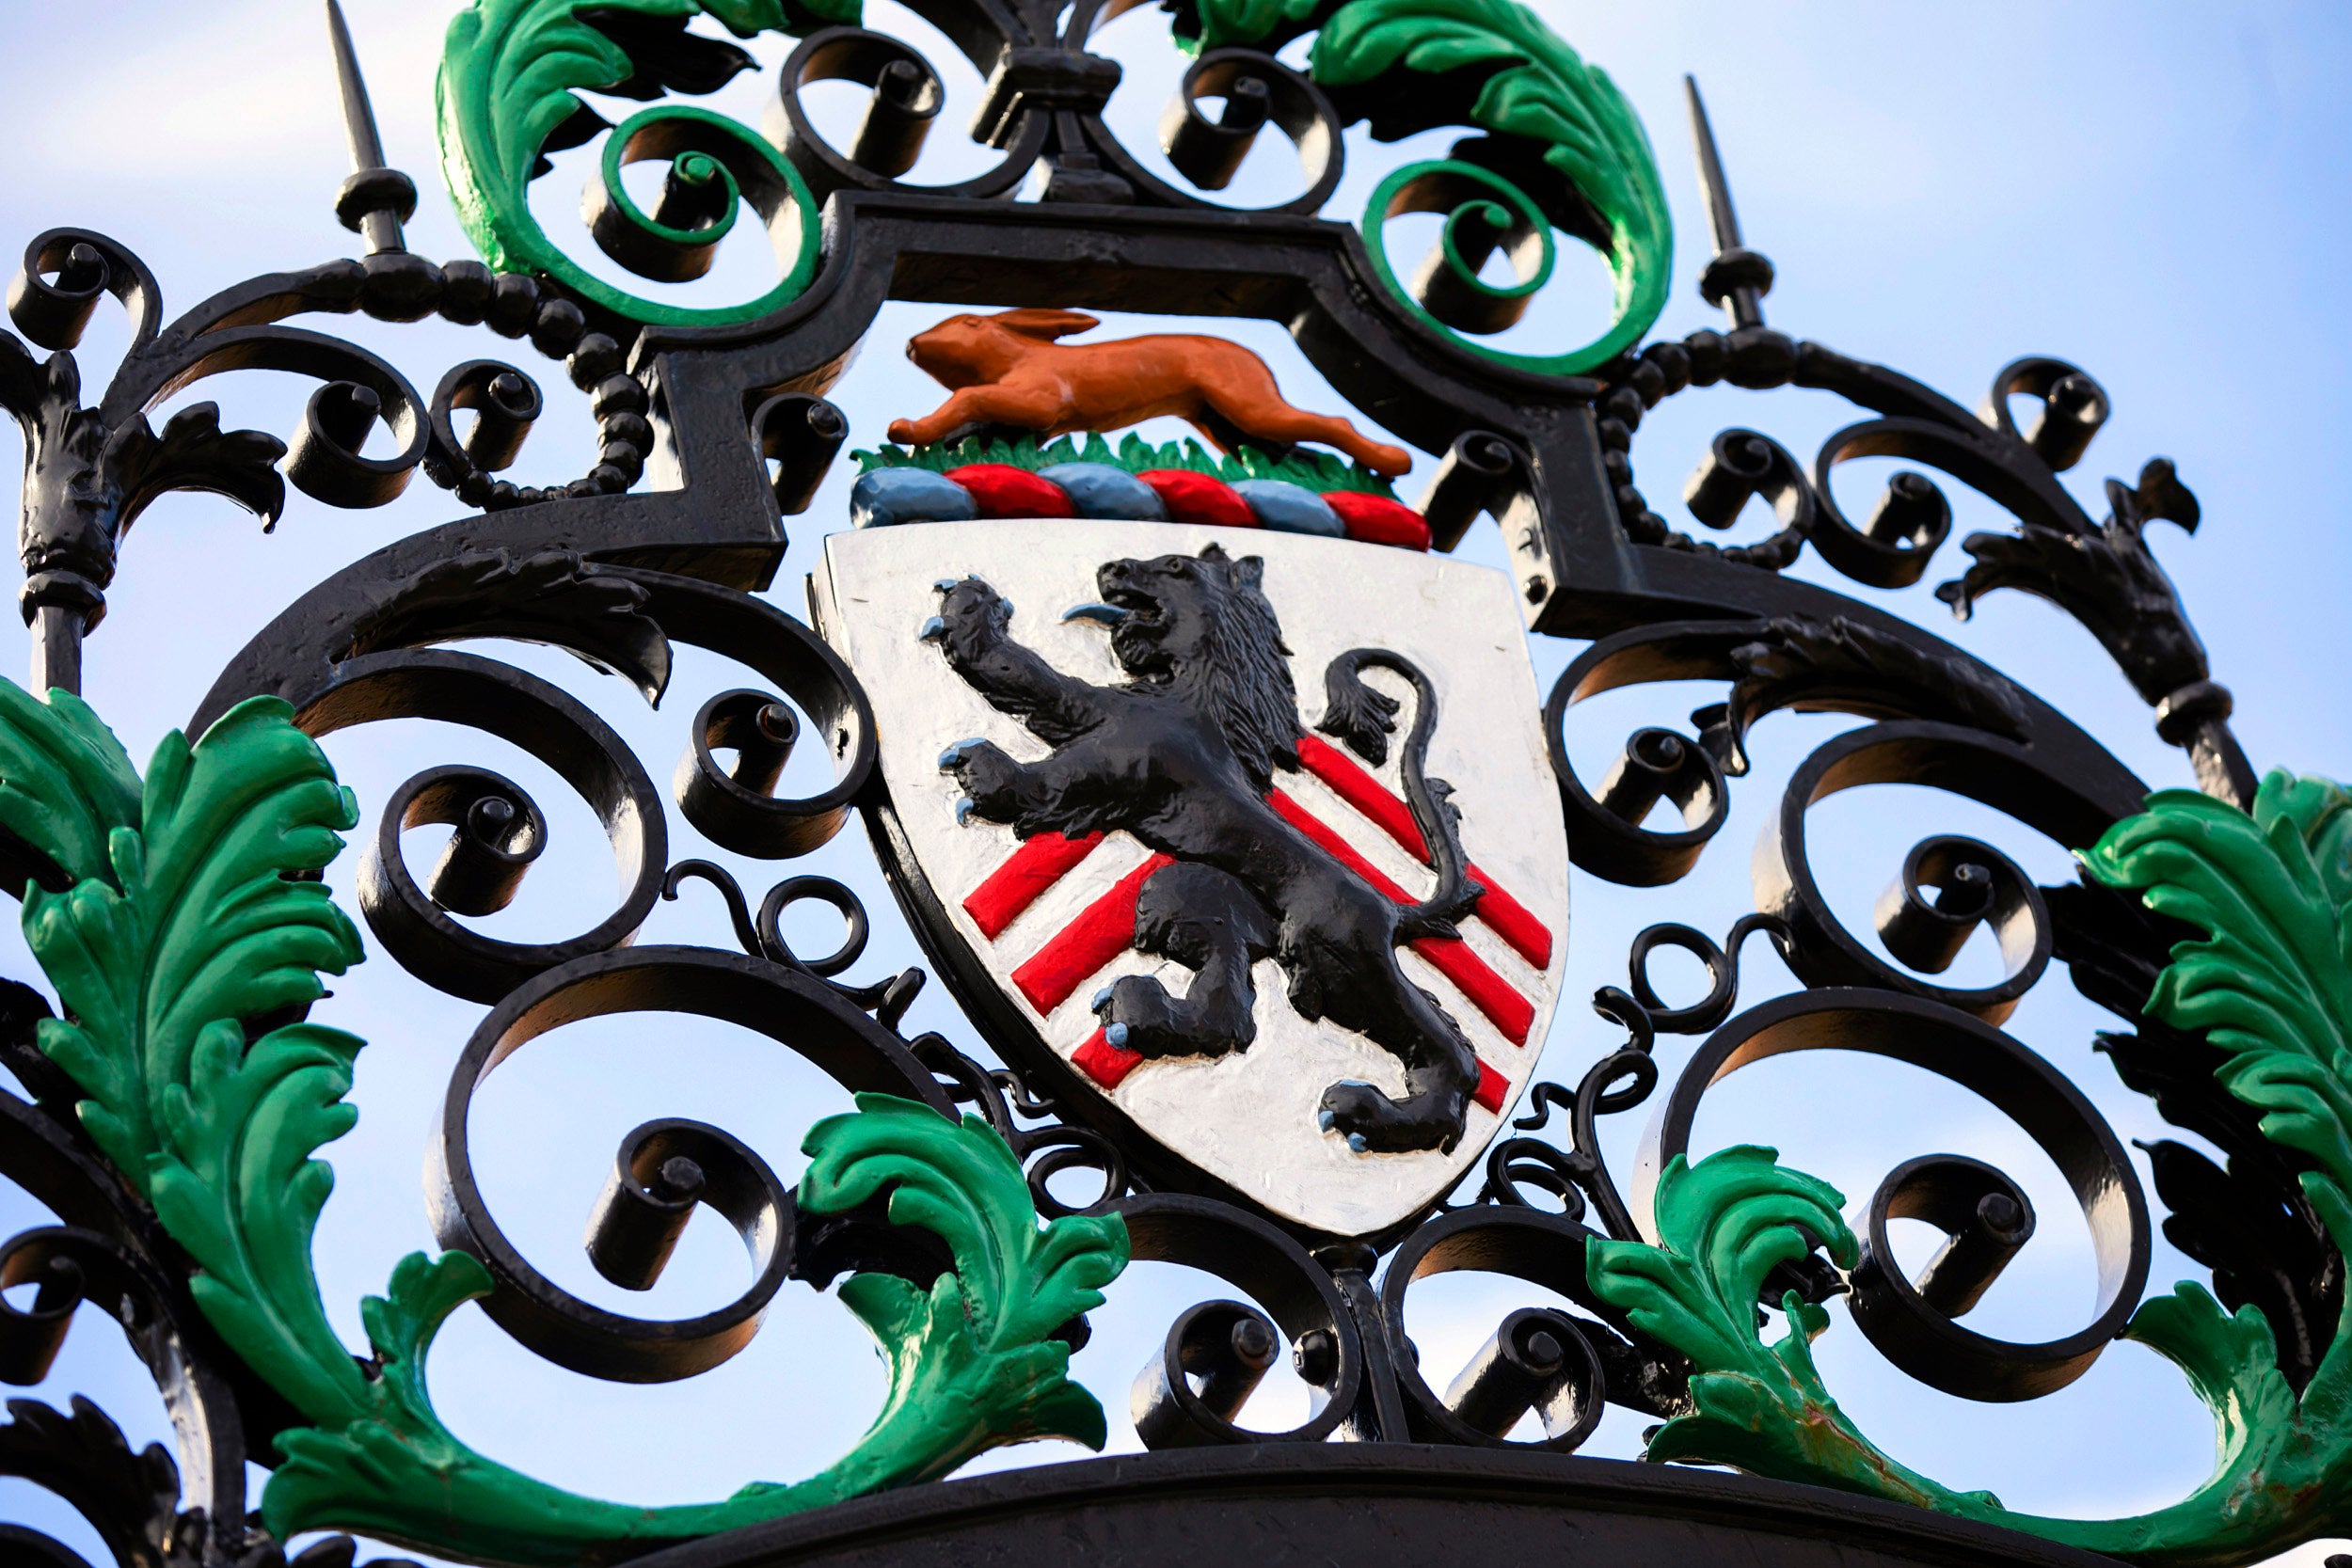 A rabbit leaps over the lion crest on the wrought-iron gate.